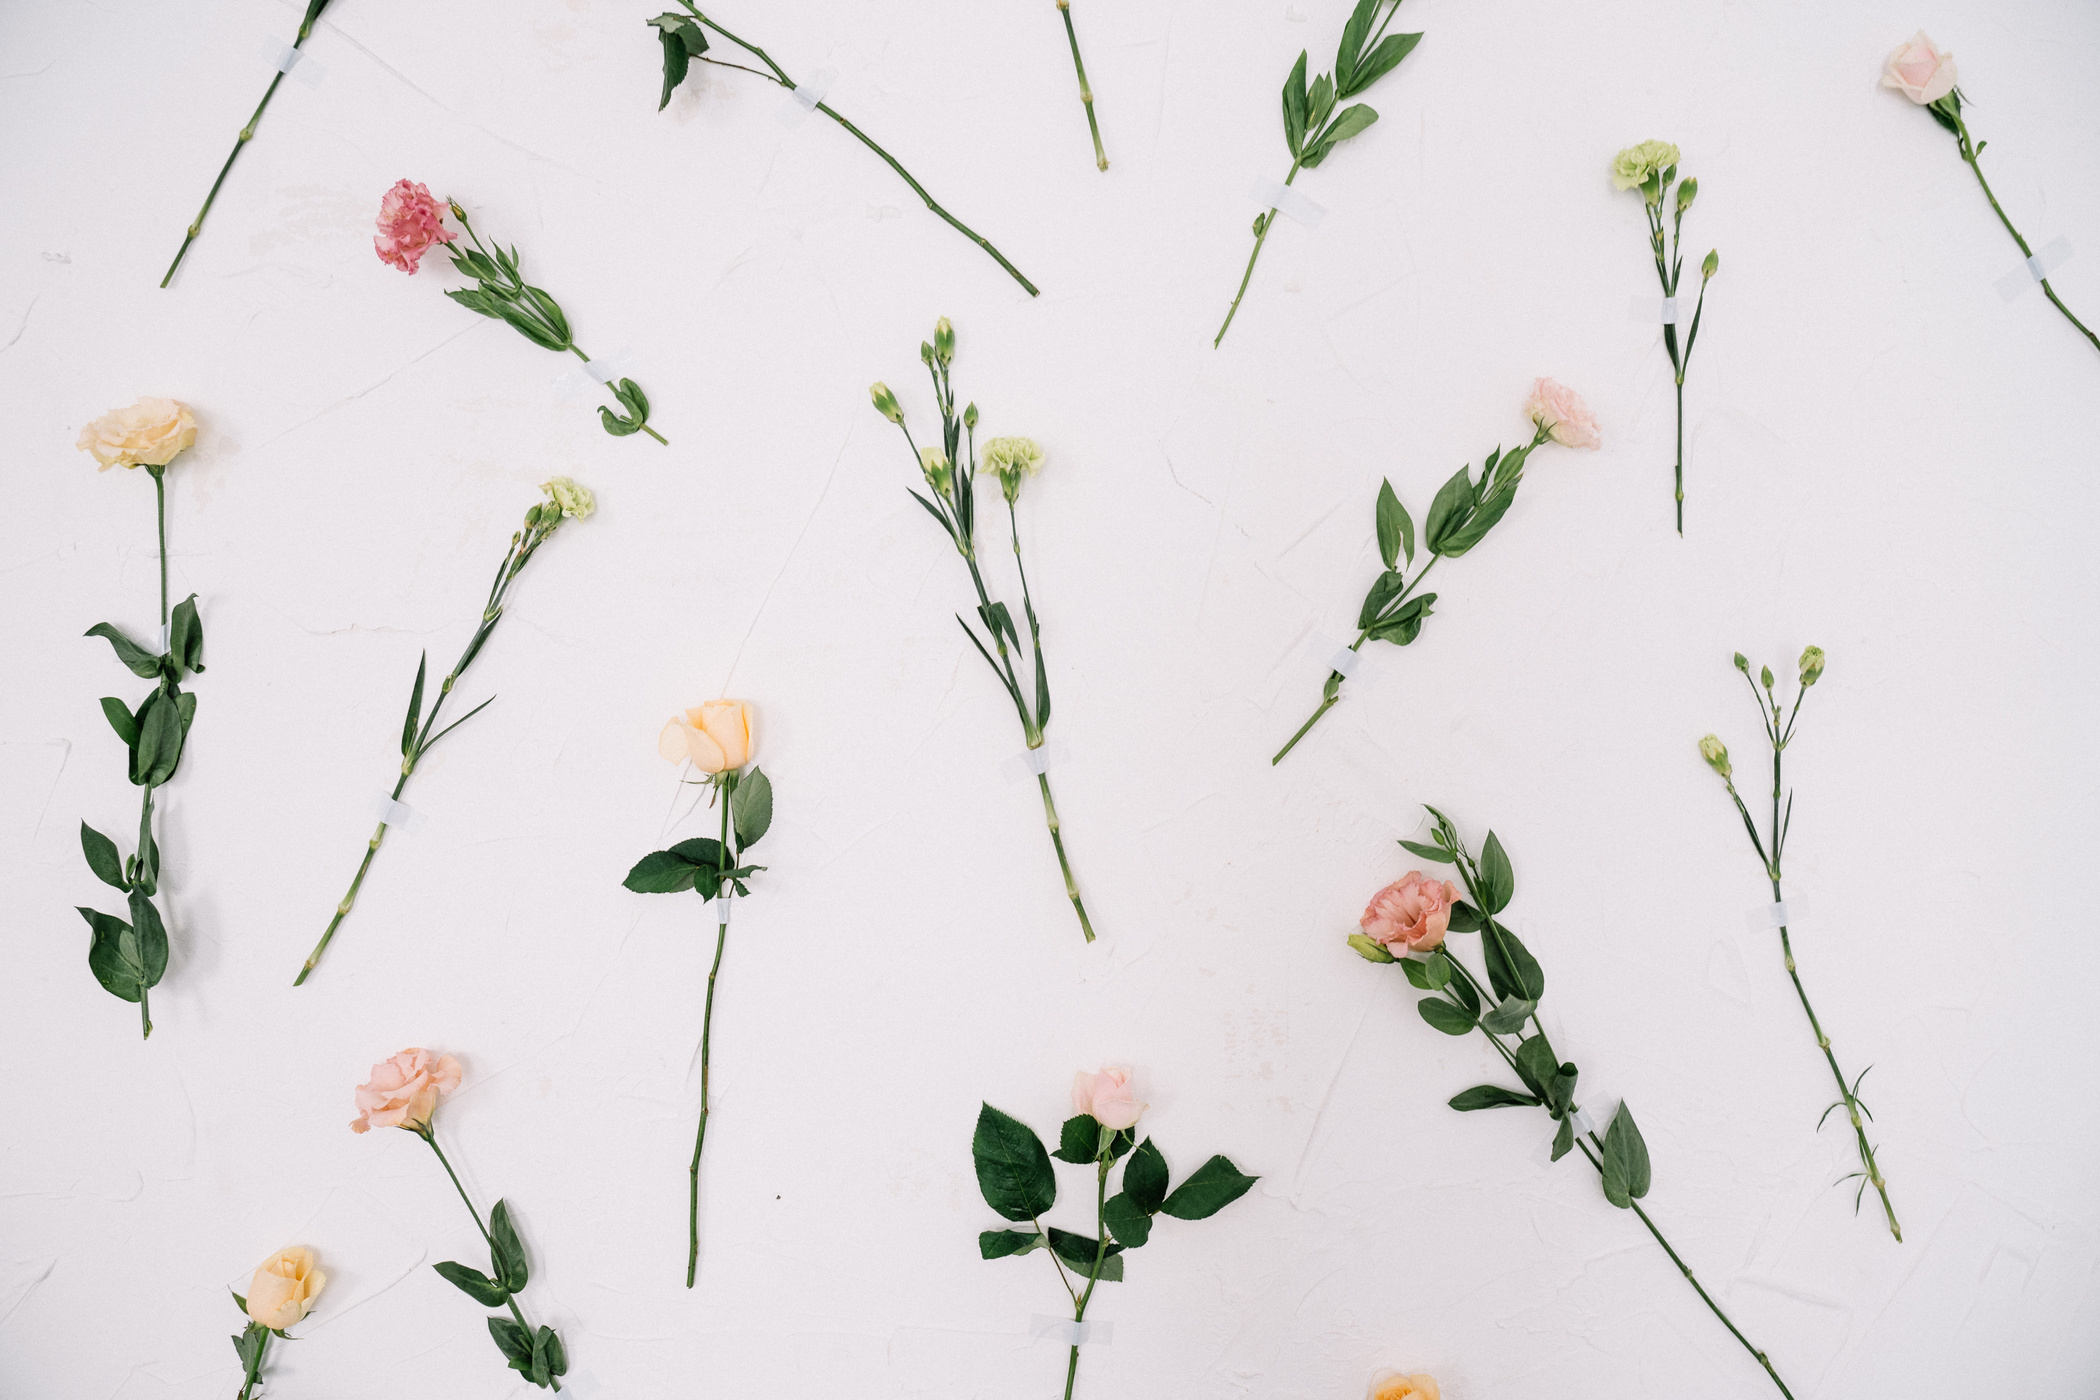 Flowers on White Wall